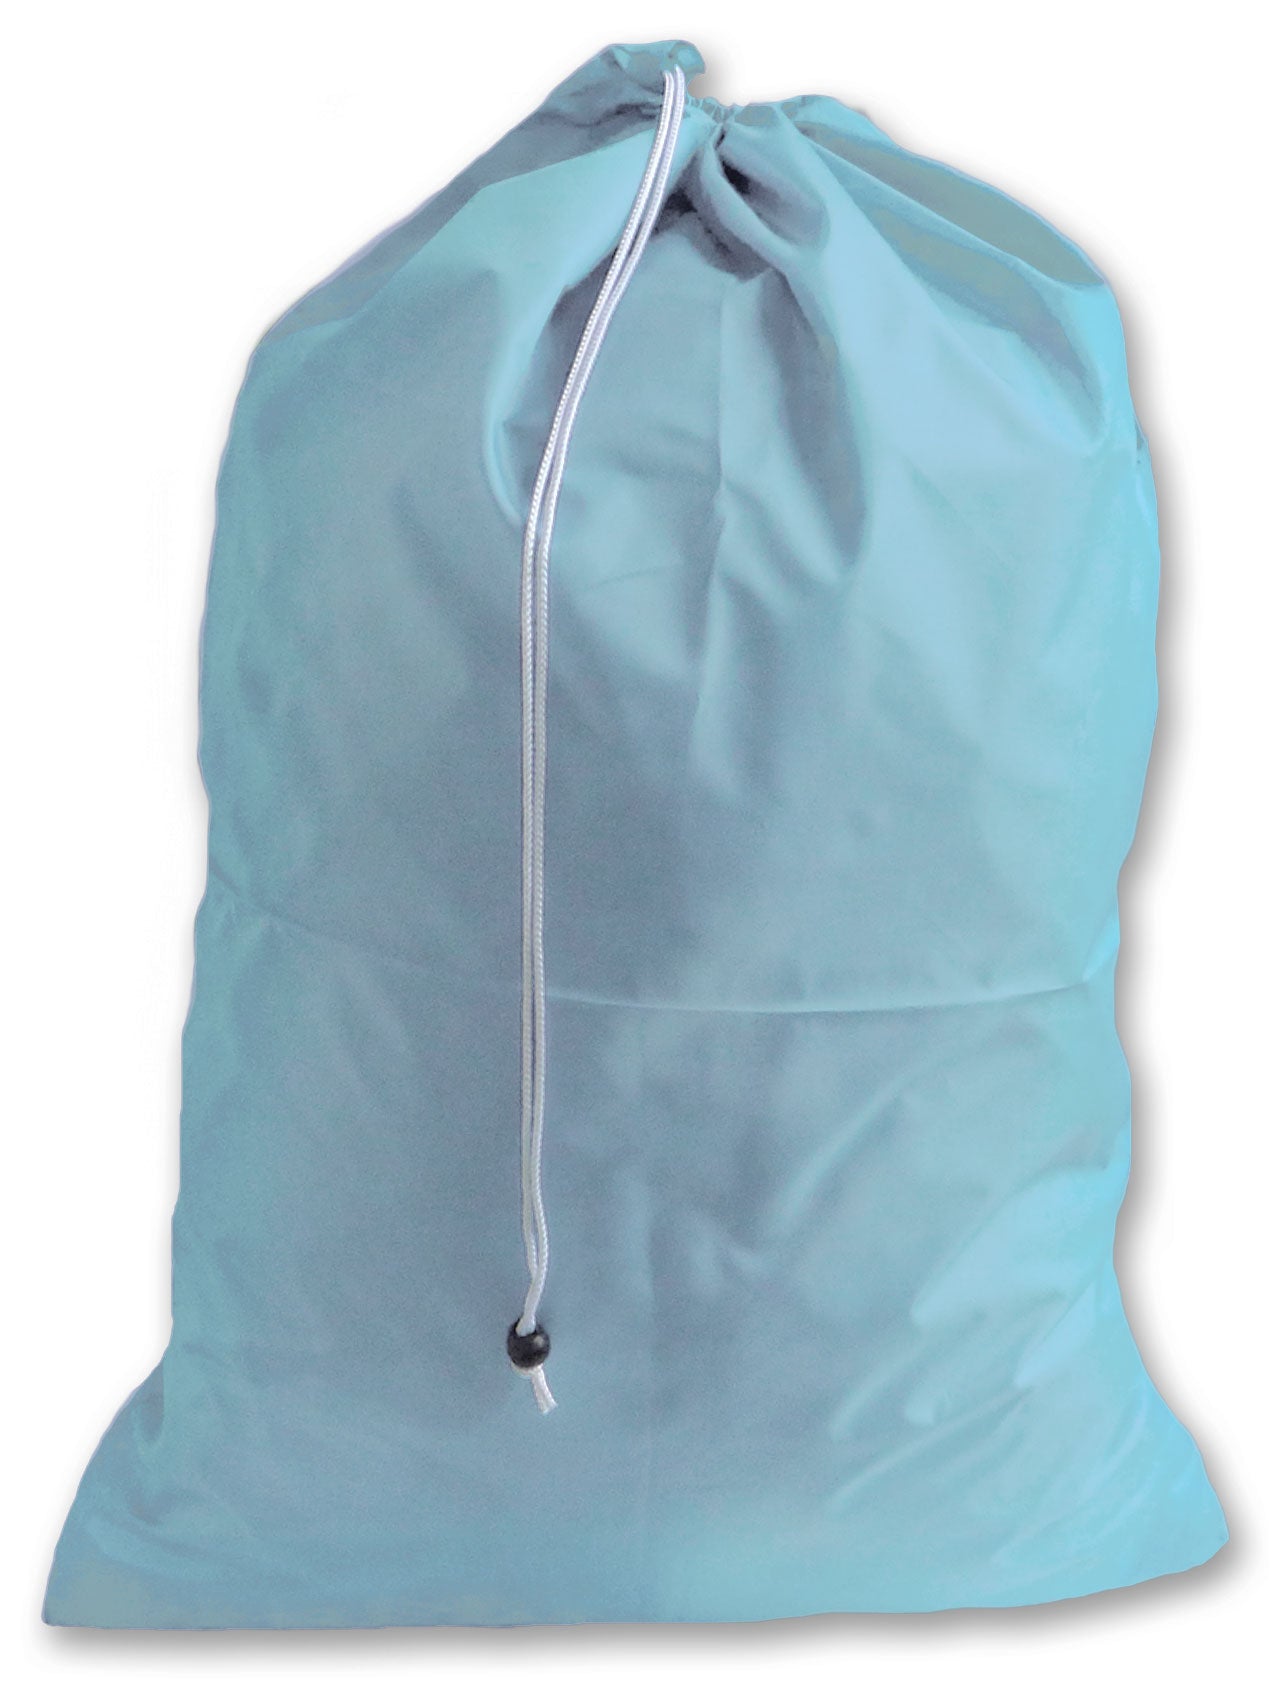 Extra Large Laundry Bags, Sky Blue, 2 Pack